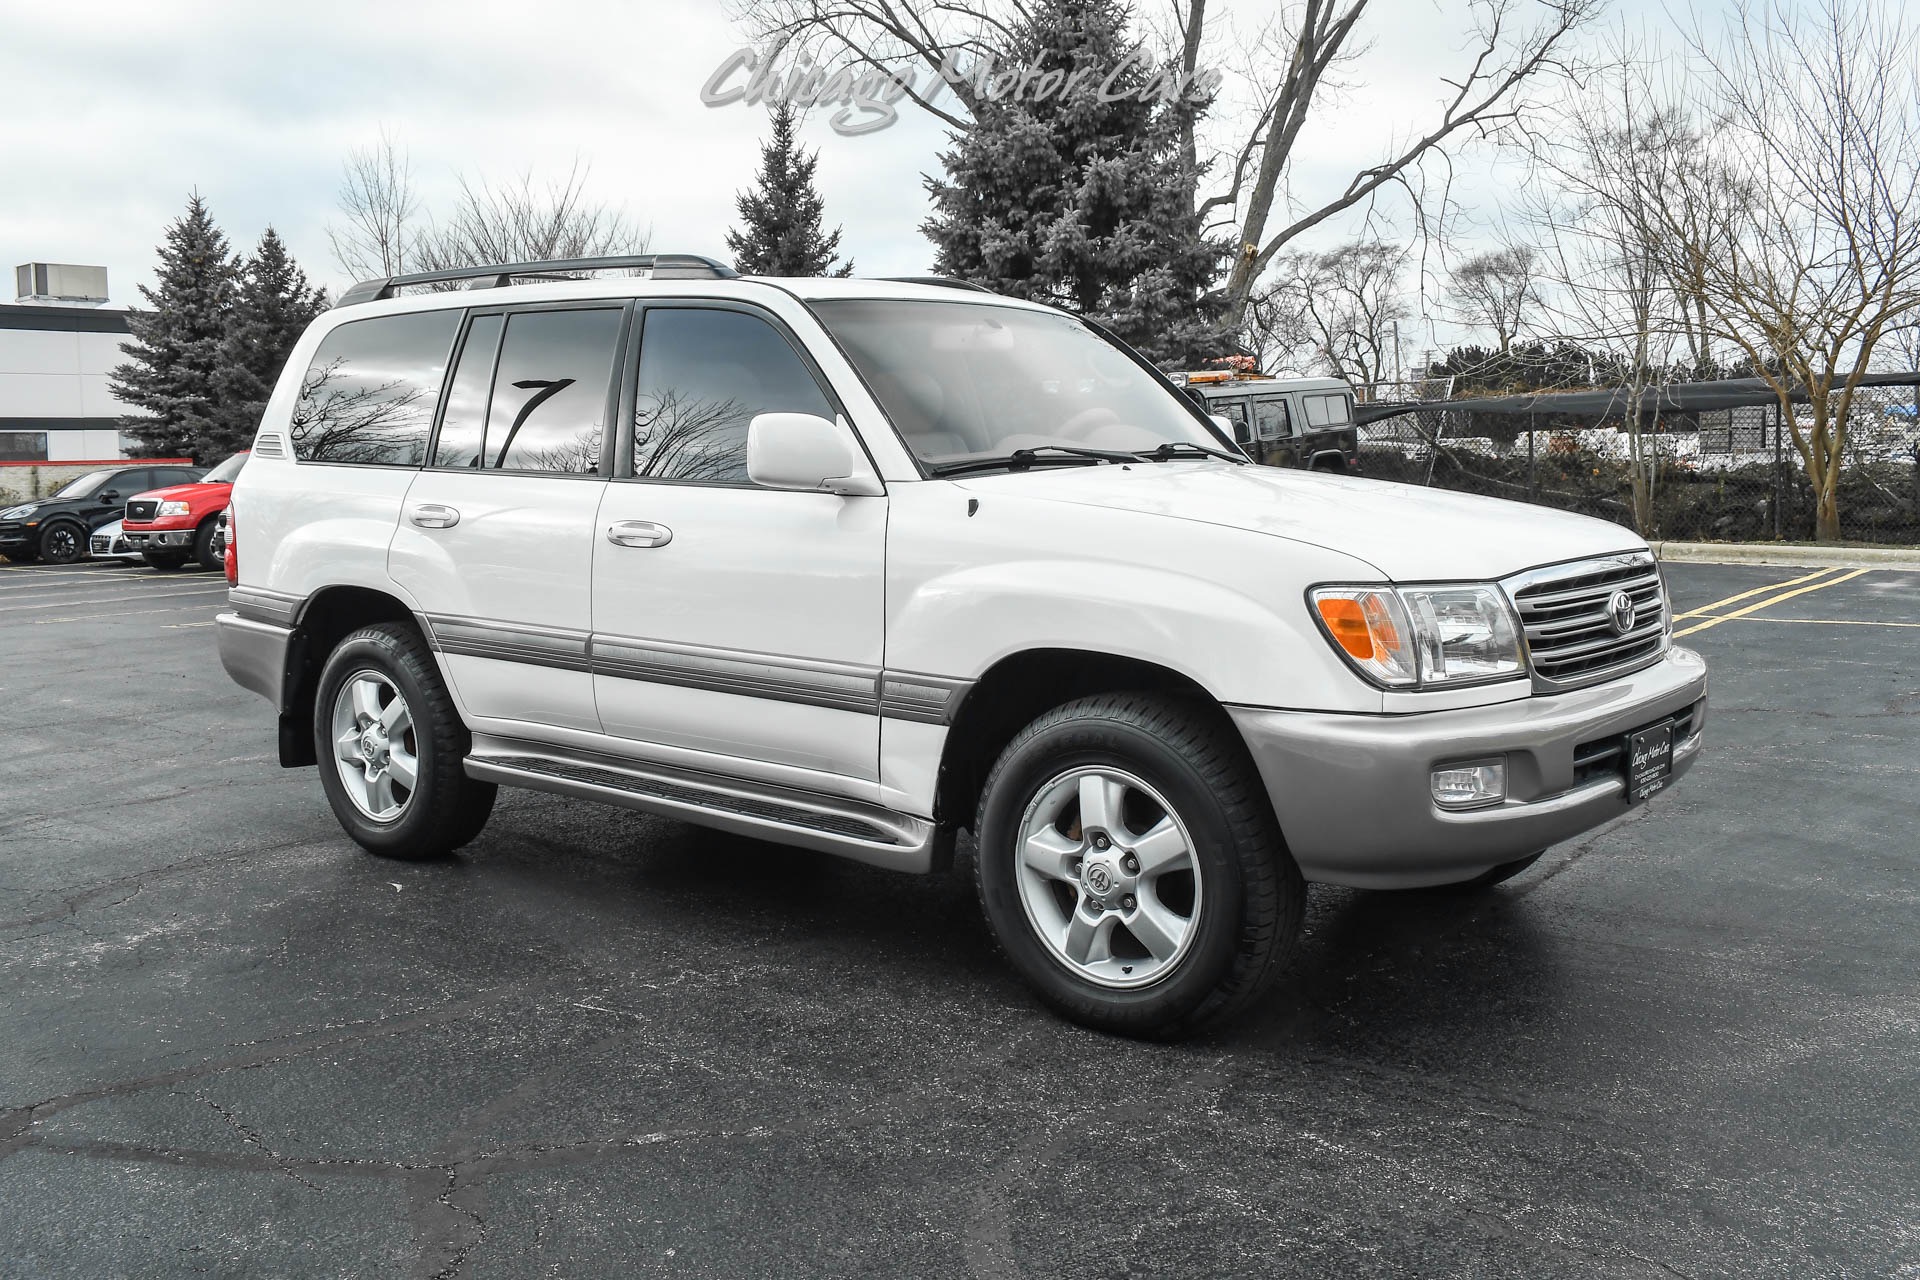 Used-2004-Toyota-Land-Cruiser-TWO-OWNER-LEATHER-5K-IN-SERVICE-TIMING-BELT-3RD-ROW-REAR-DIFF-LOCK